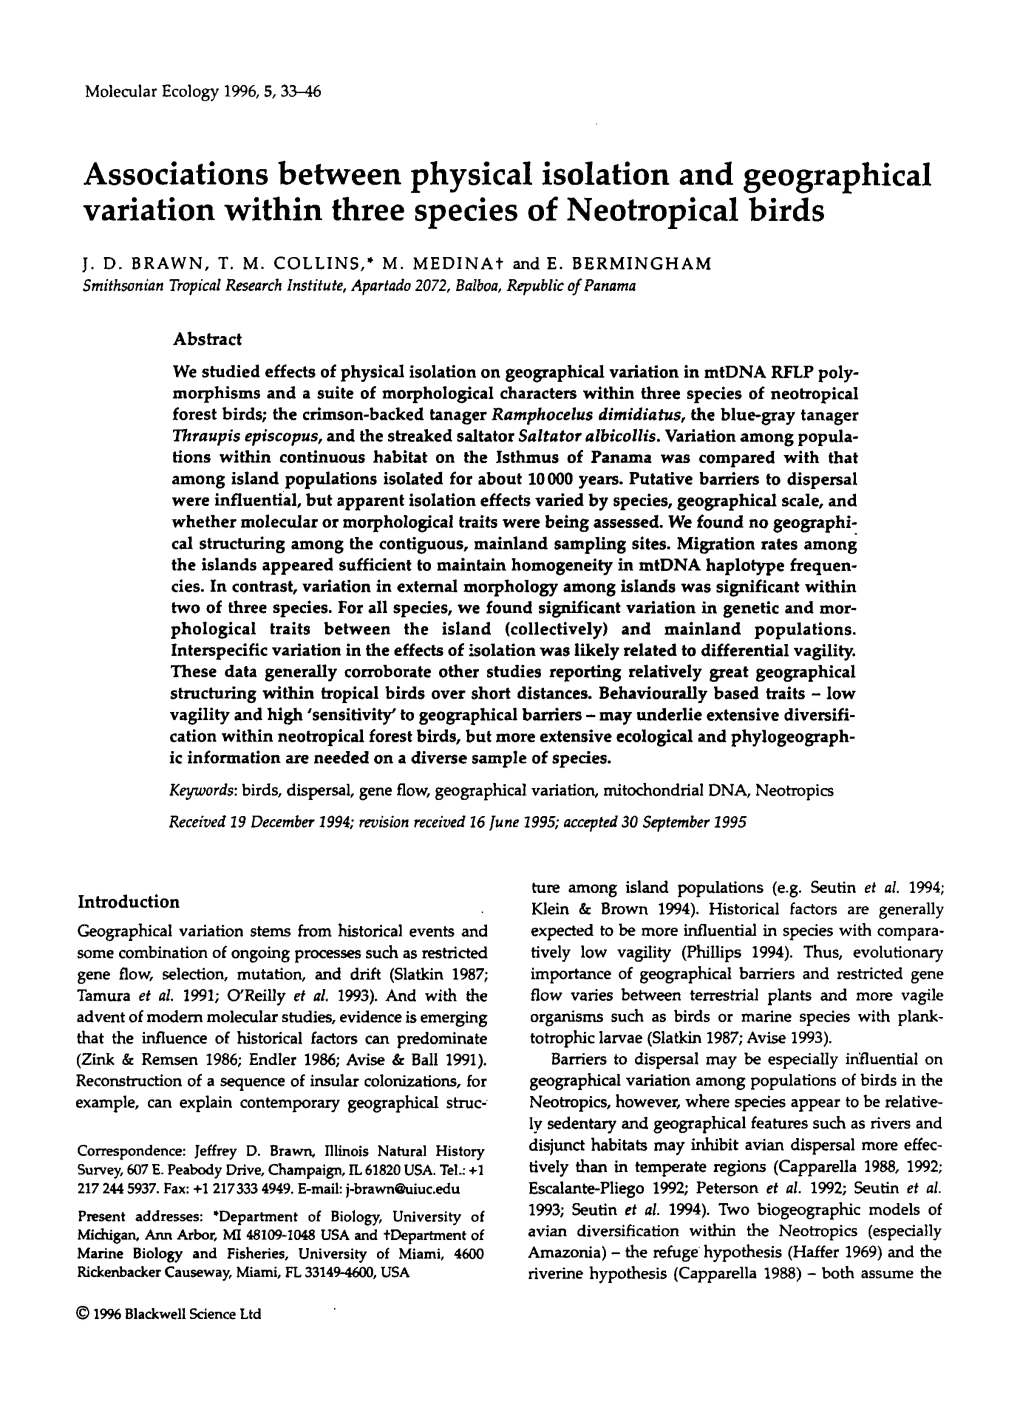 Associations Between Physical Isolation and Geographical Variation Within Three Species of Neotropical Birds